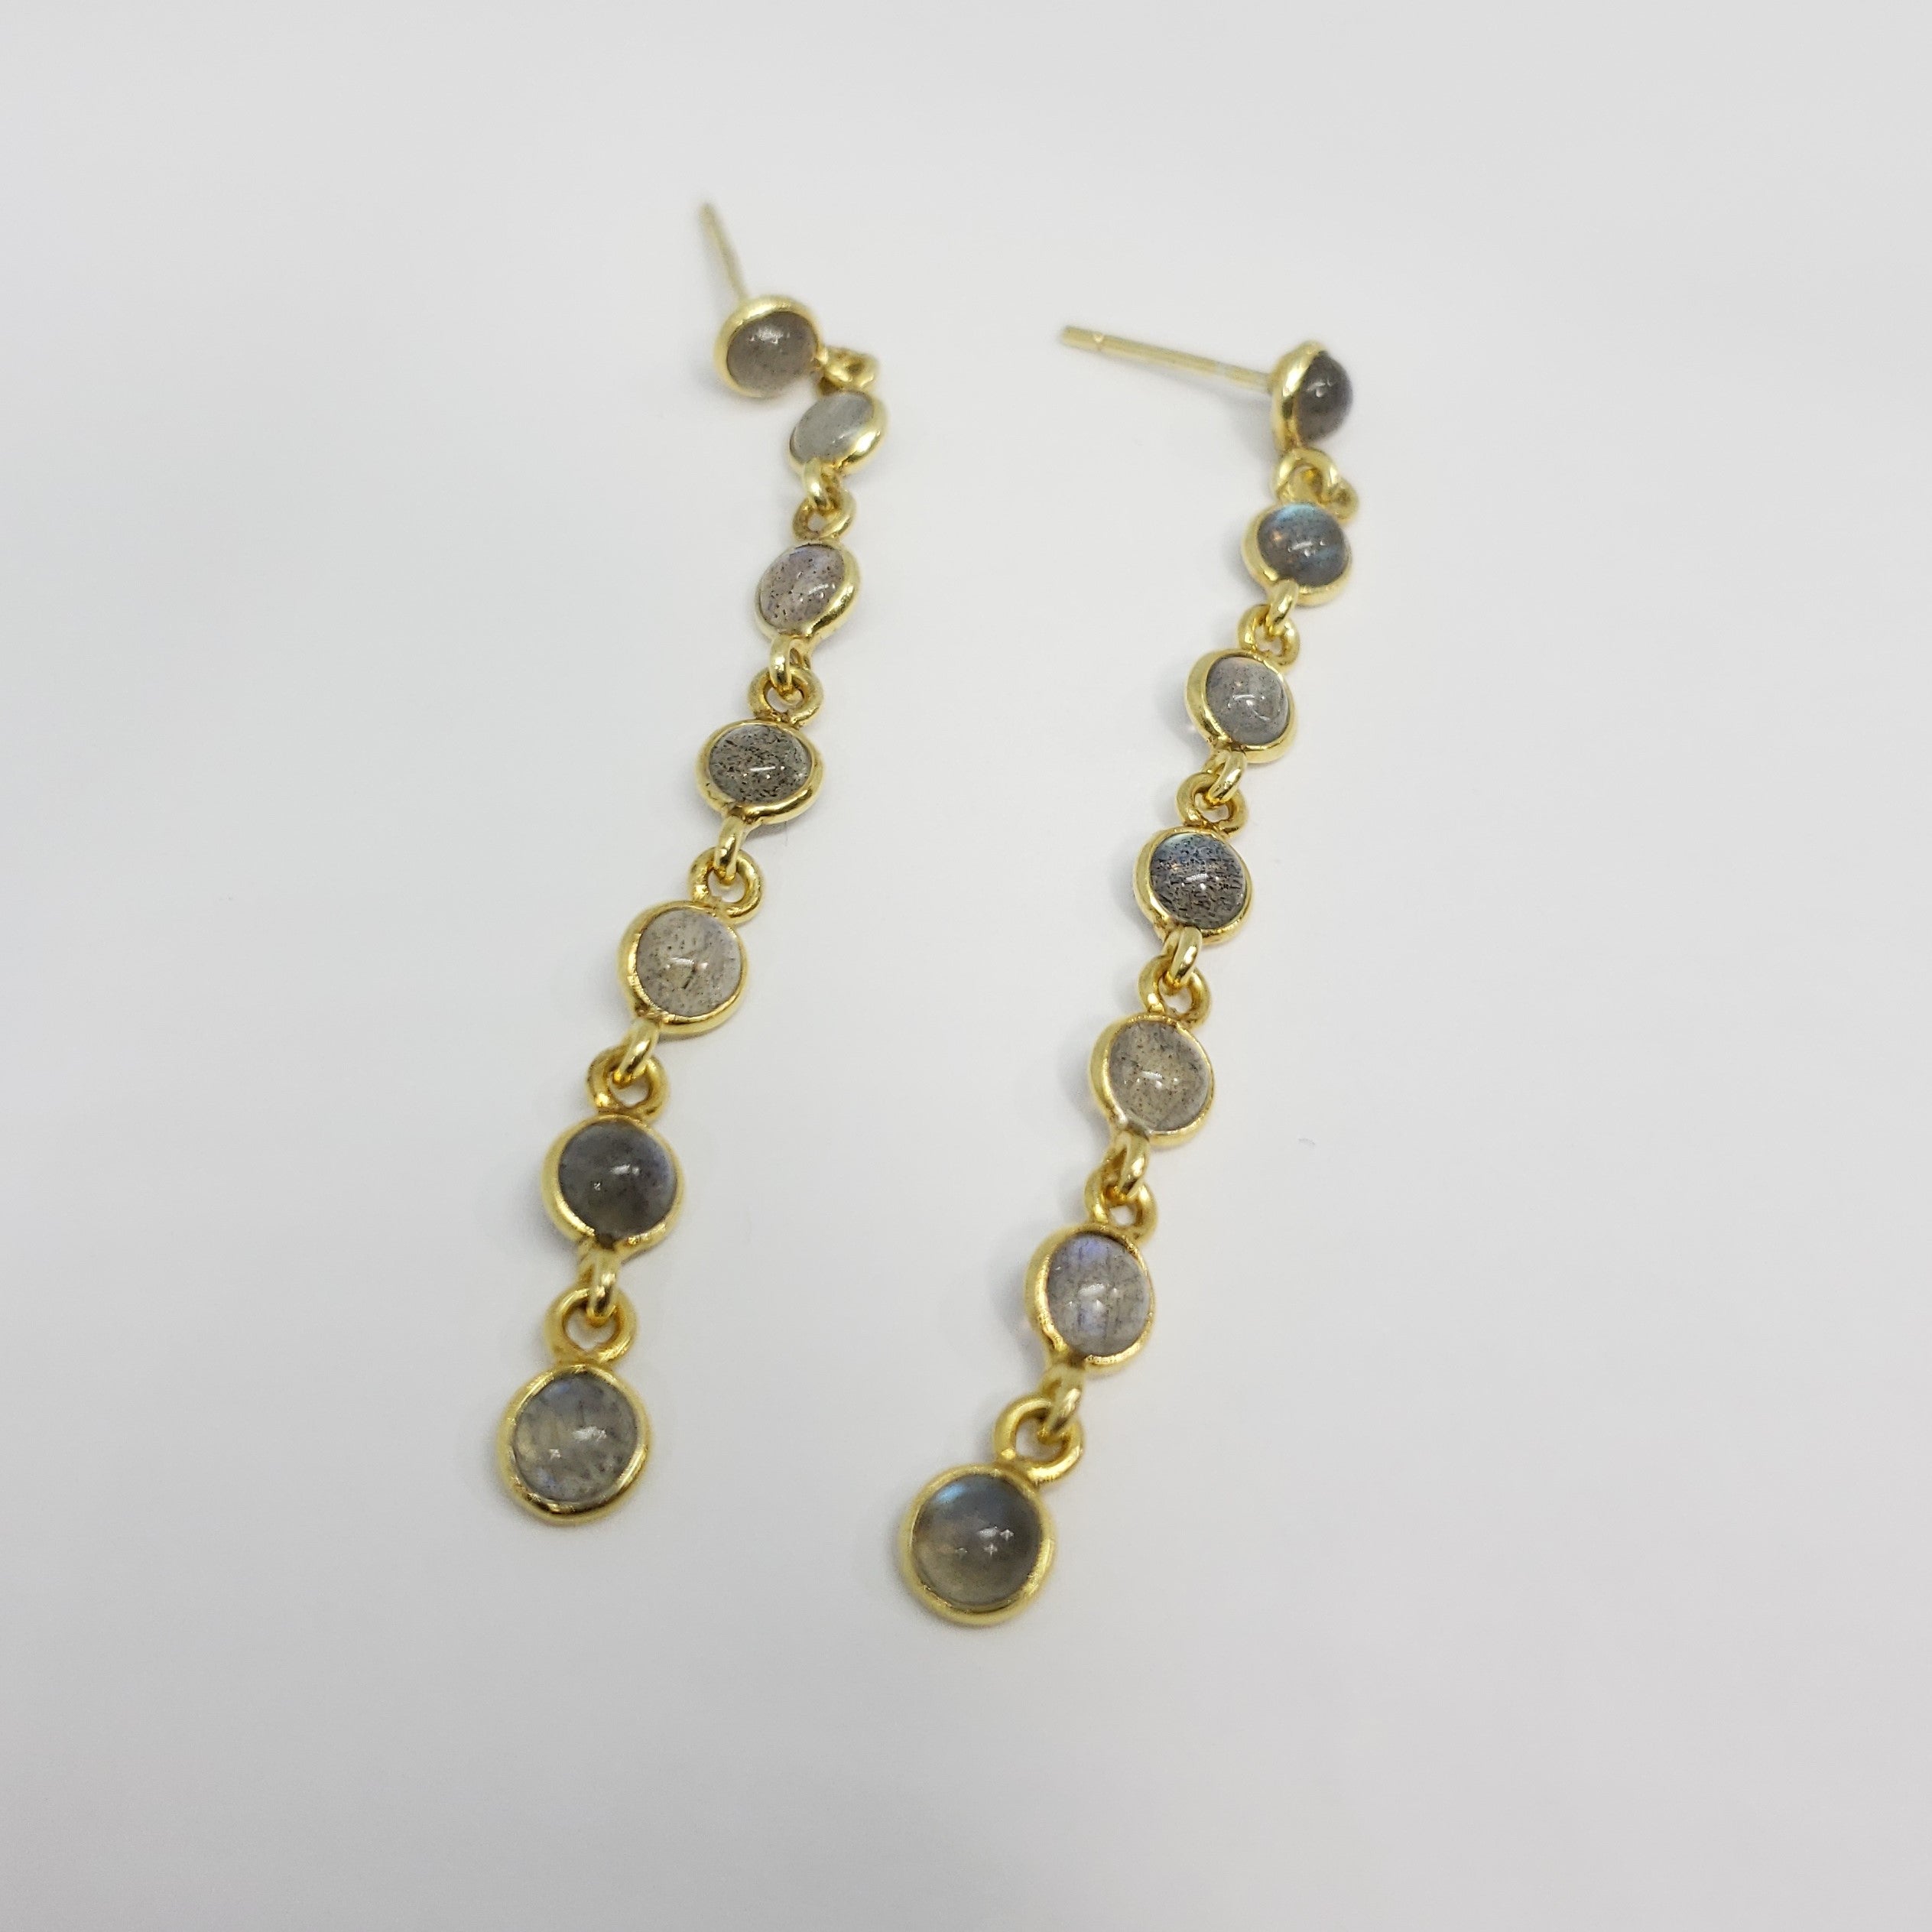 Malagasy Labradorite 14K YG Over Sterling Silver Line Drop Earrings TGW 3.50 cts. - Houzz of DVA Boutique